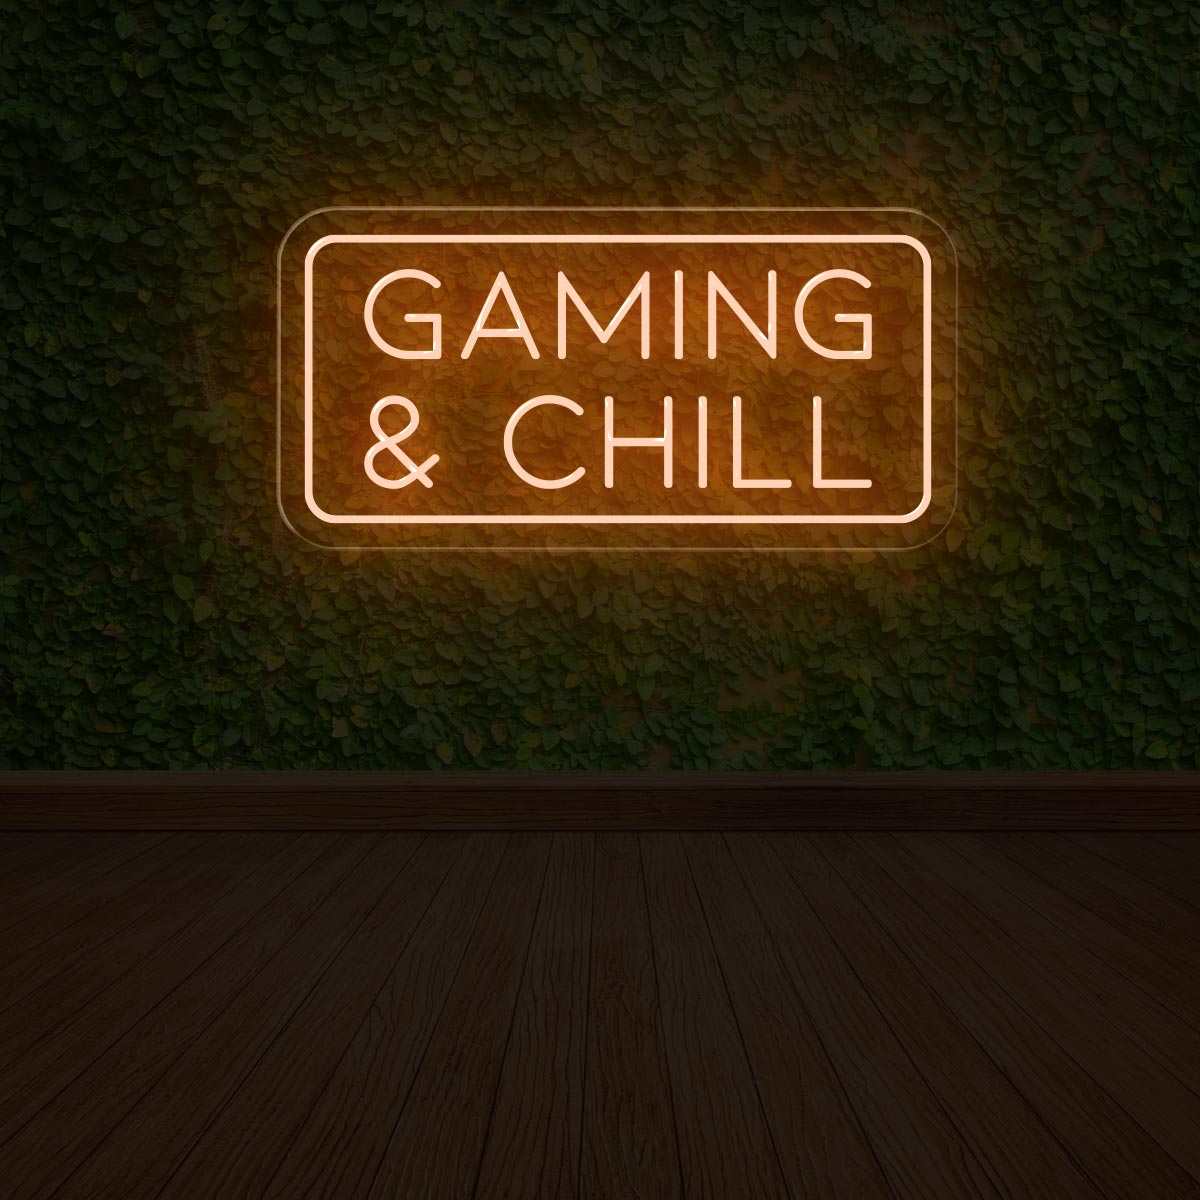 Gaming & Chill Neon Sign - Cozy Game Room Lighting - NEONXPERT